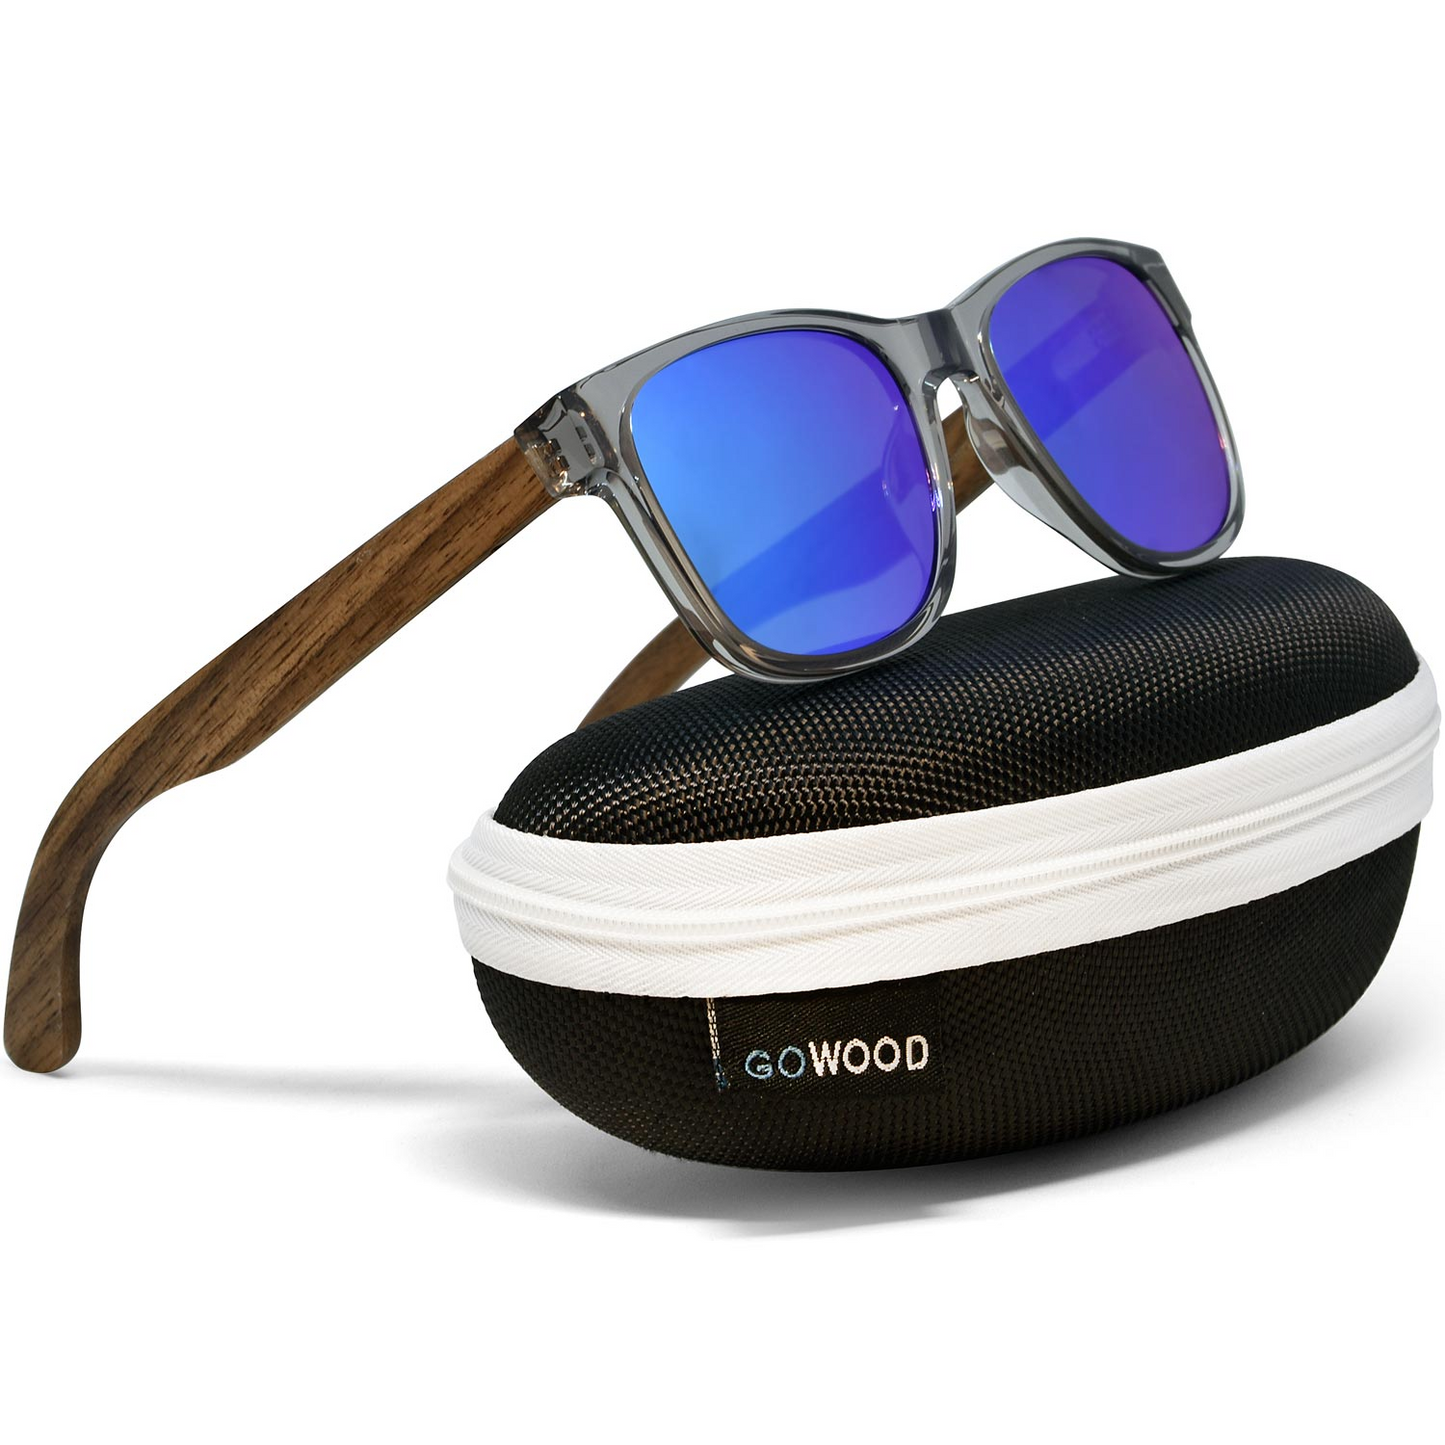 Walnut wood classic style sunglasses with semi-transparent grey frame and blue mirrored polarized lenses